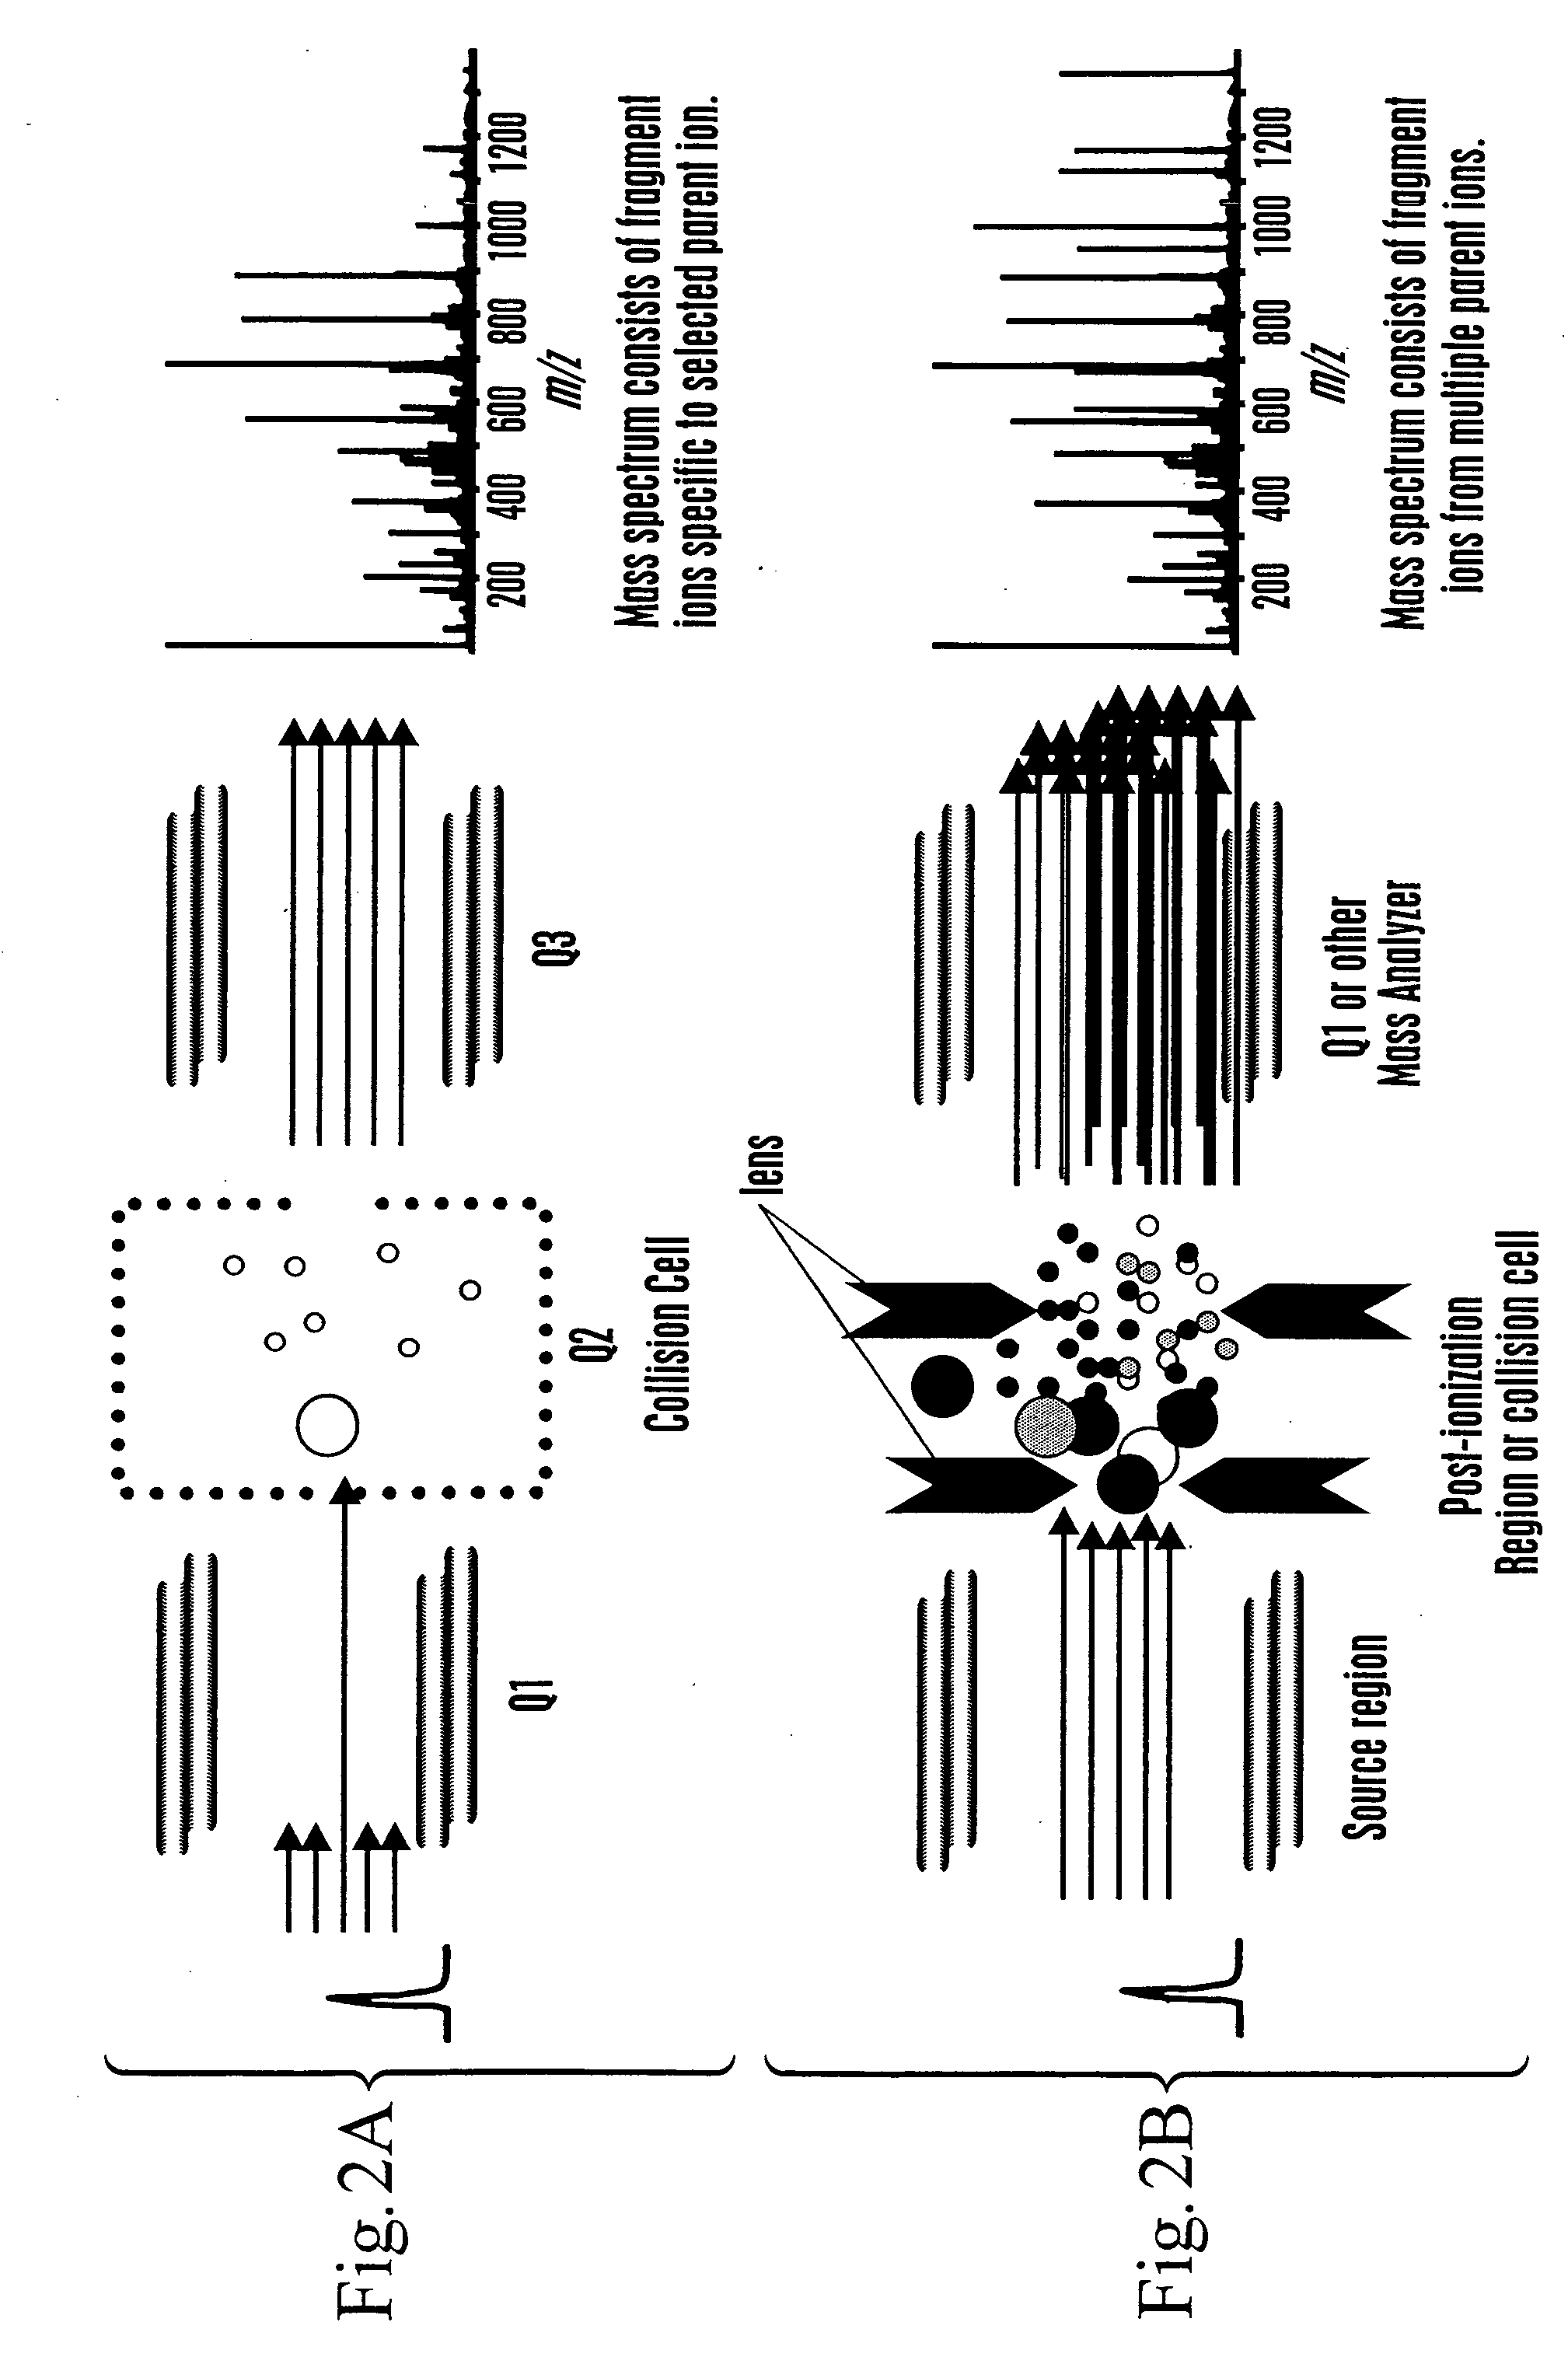 Rapid and quantitative proteome analysis and related methods